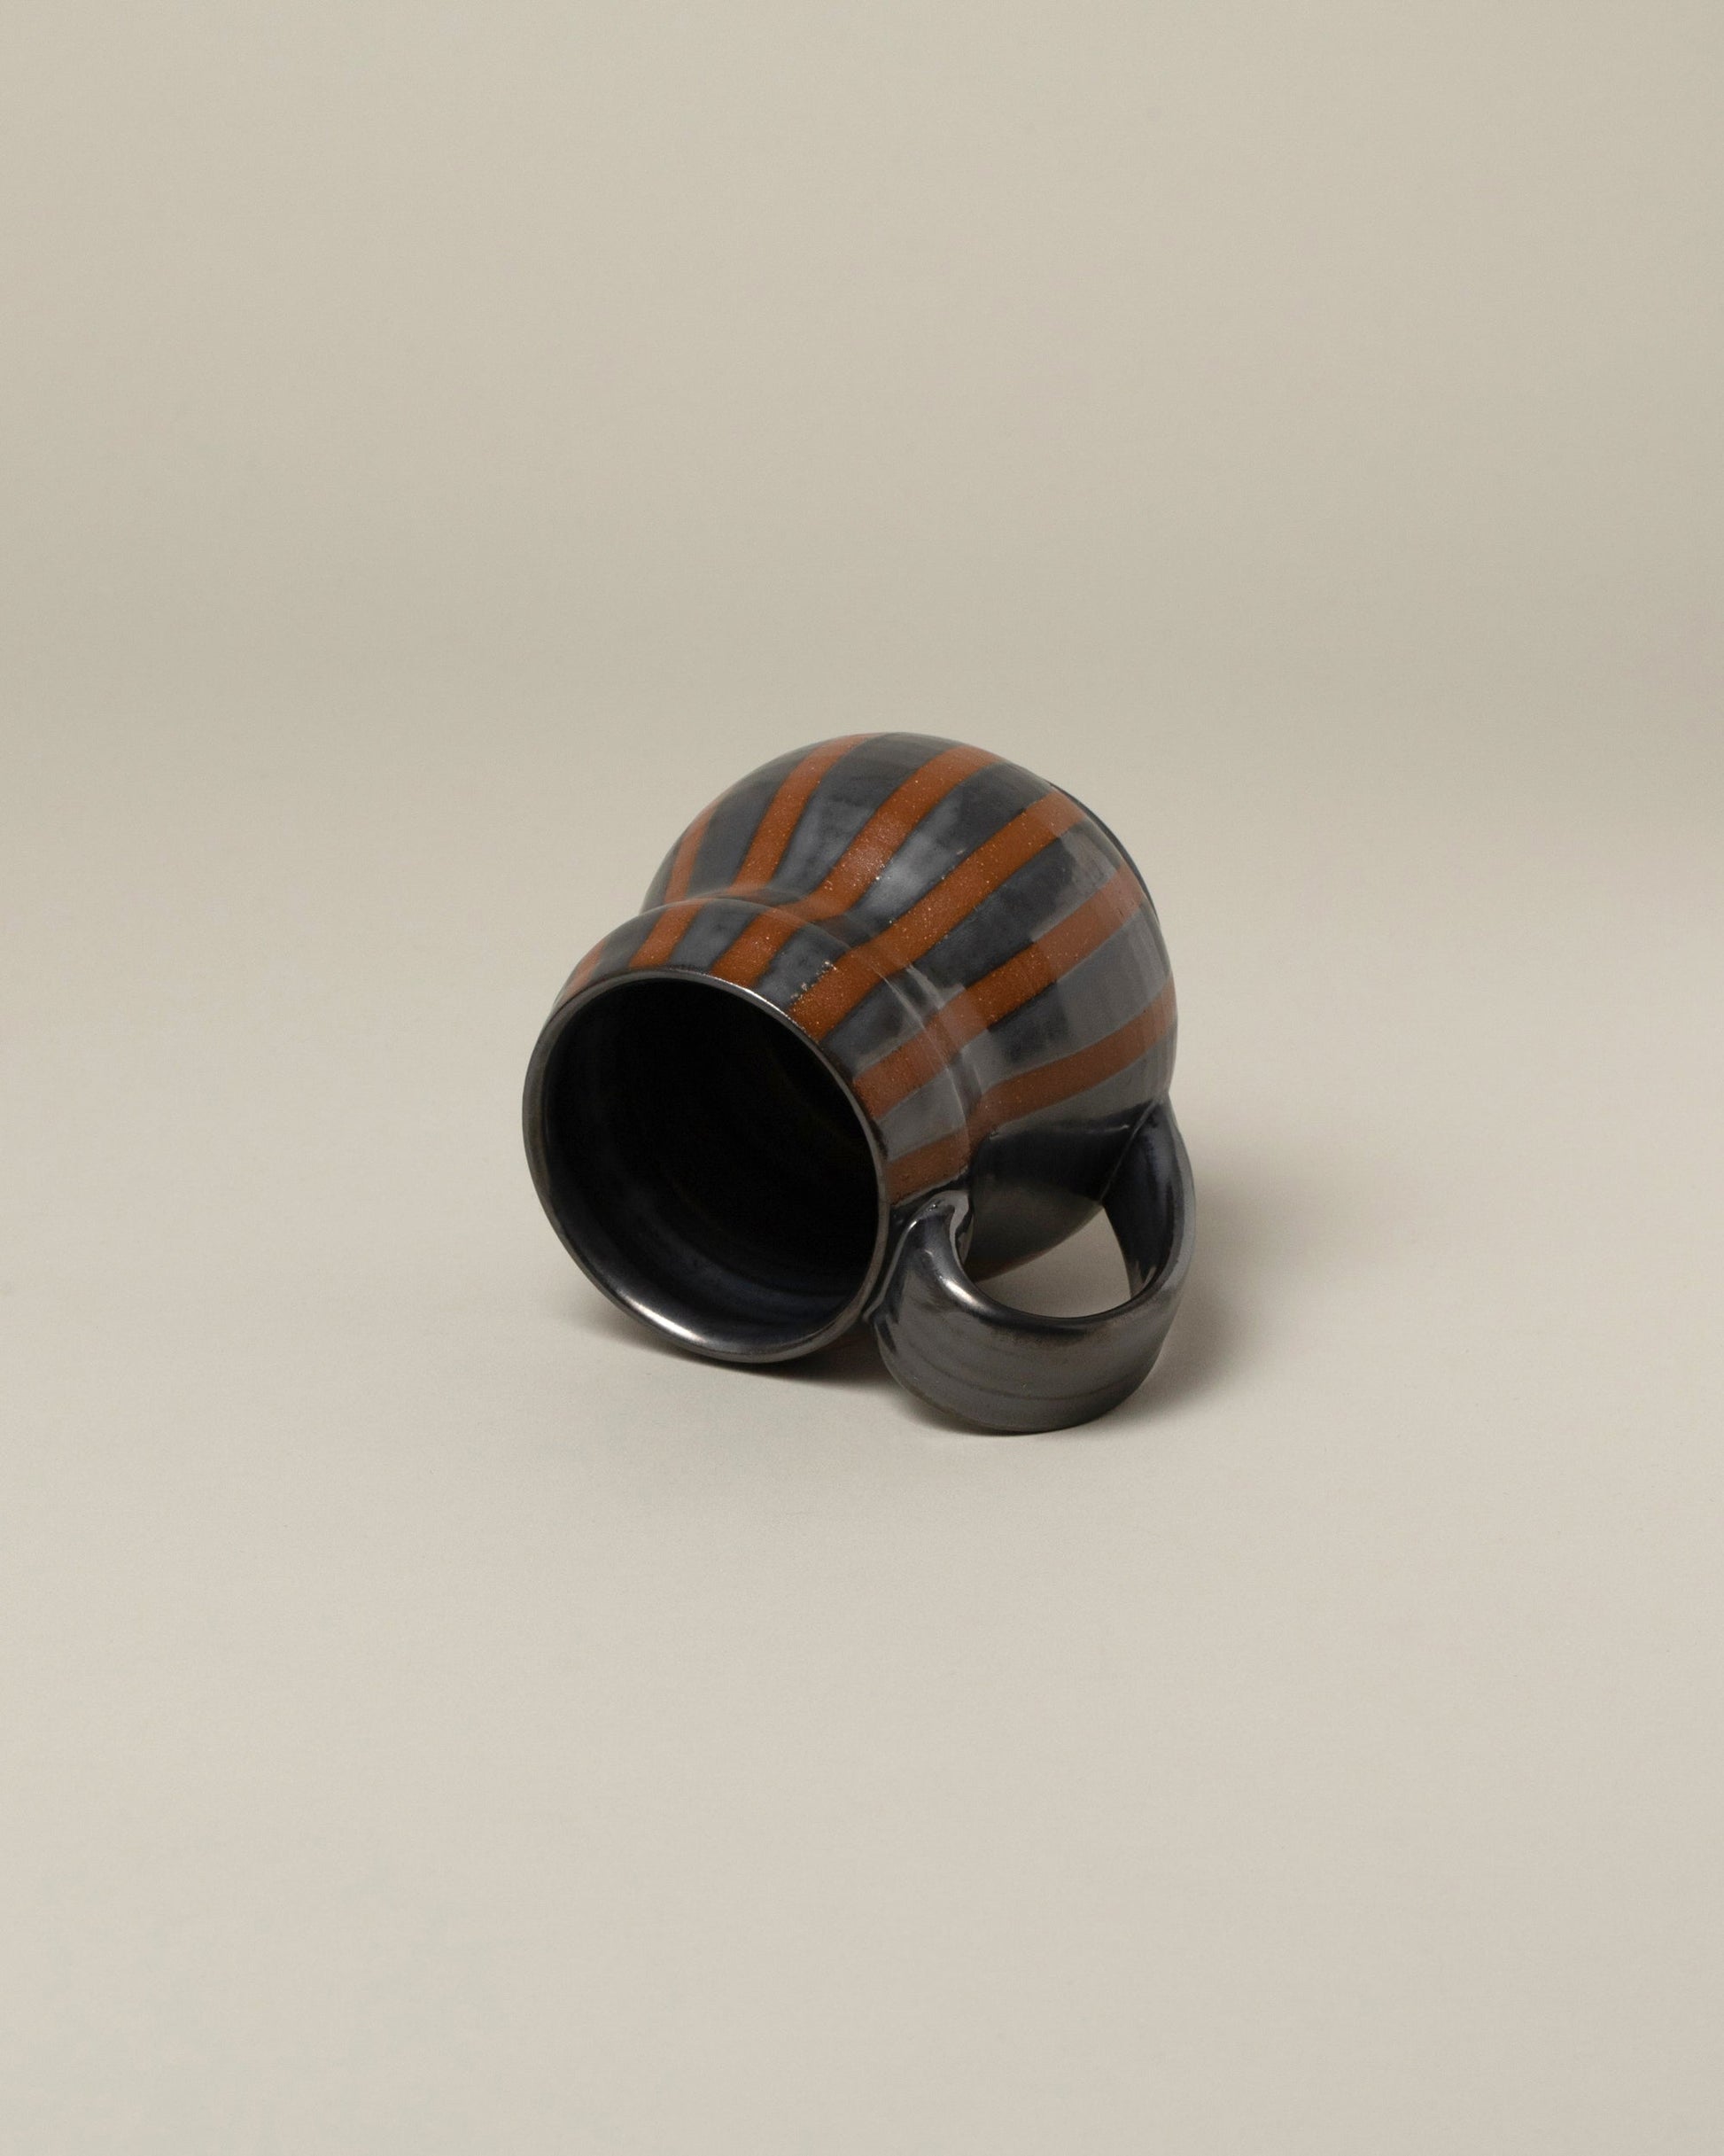 Inside view of the Jeremy Ayers Gunmetal Bubble Mug on light color background.